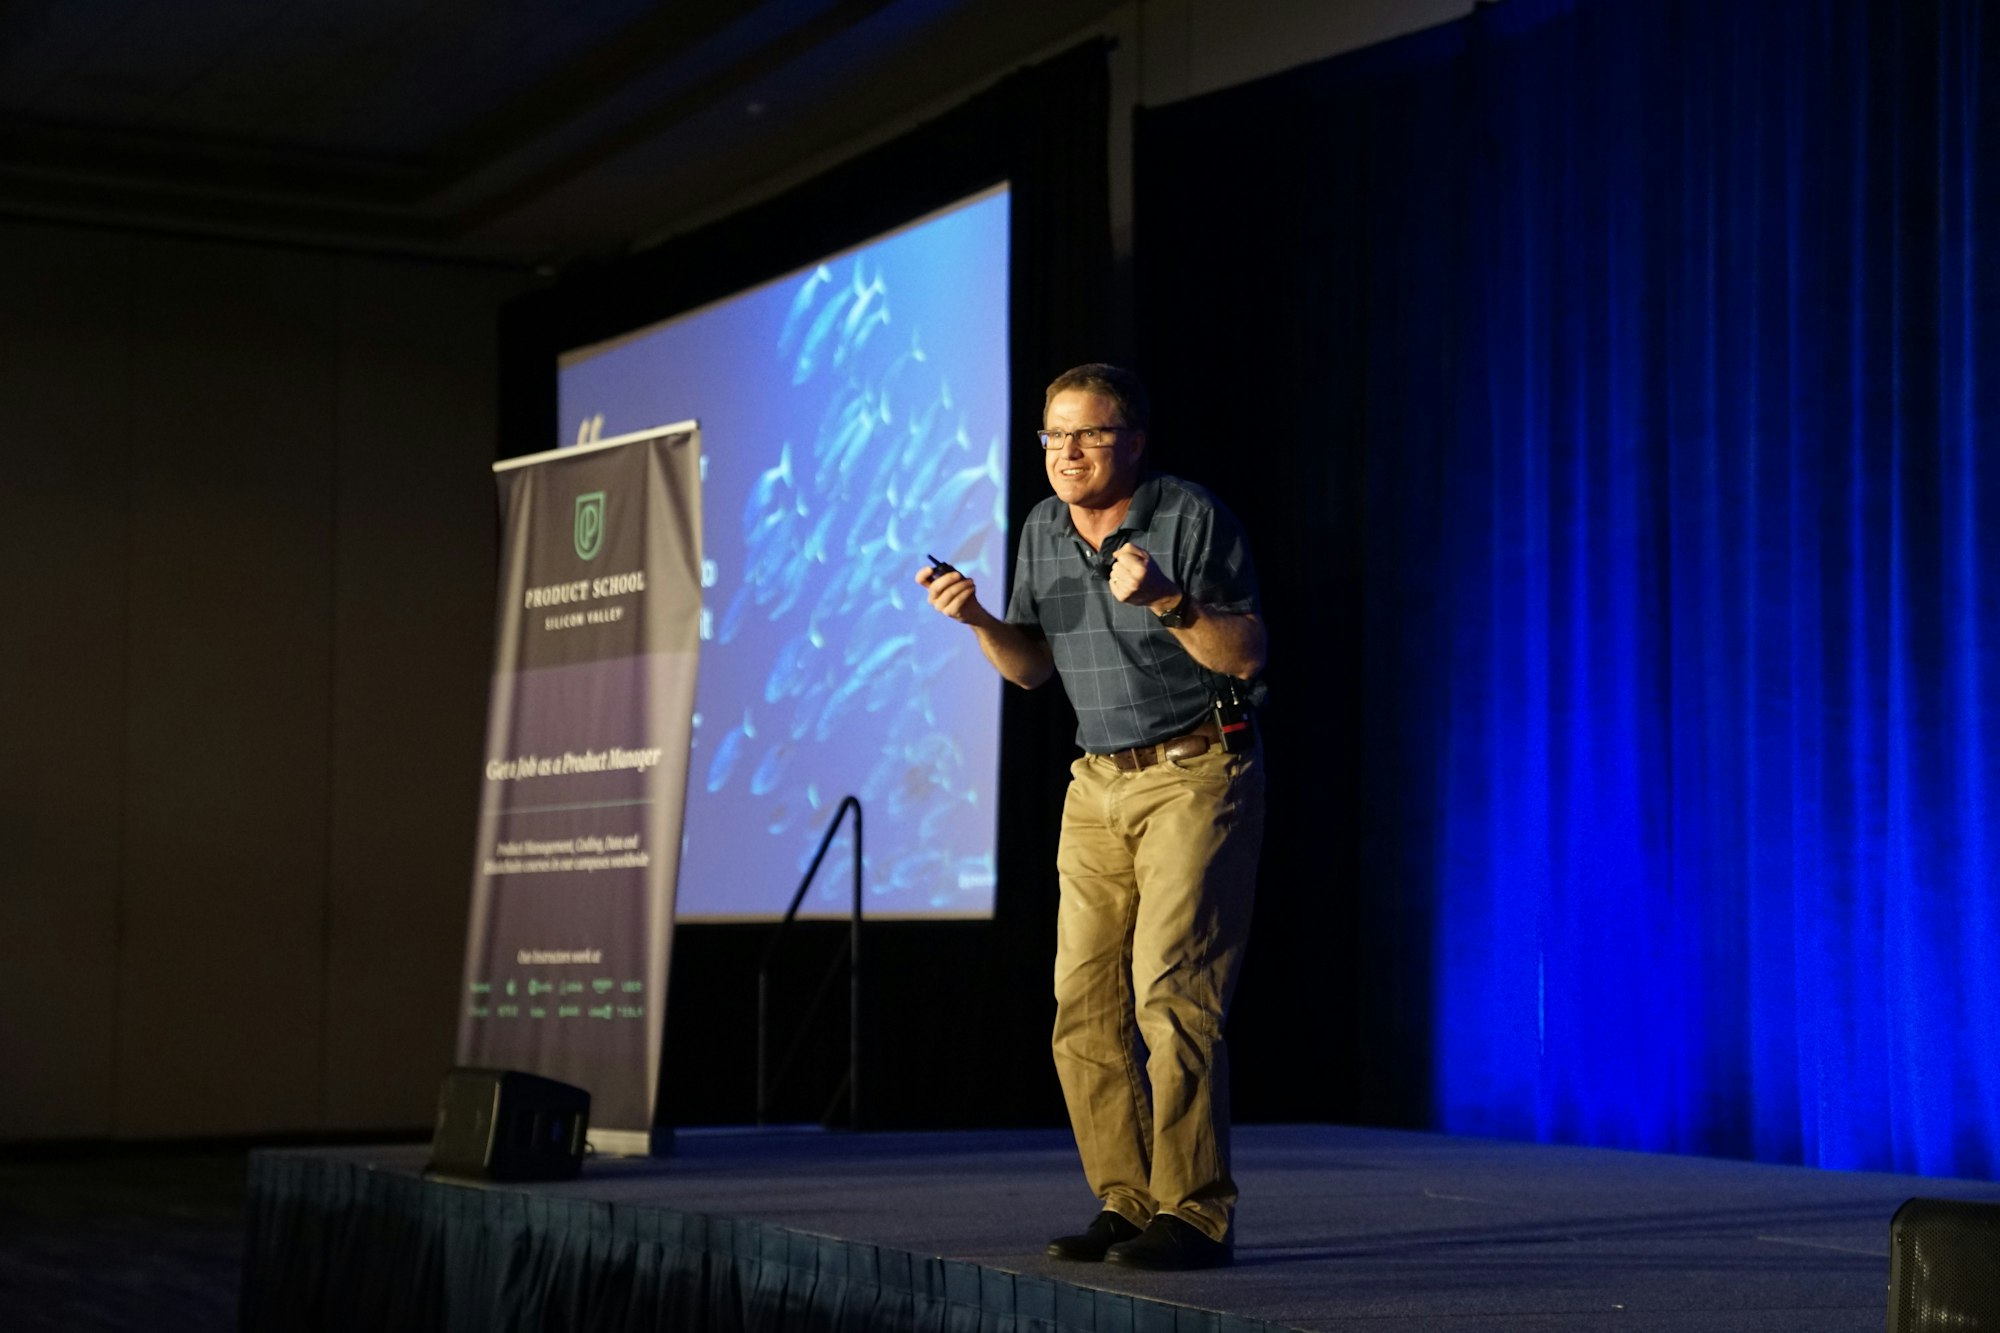 Man speaking on stage for a presentation during a conference 